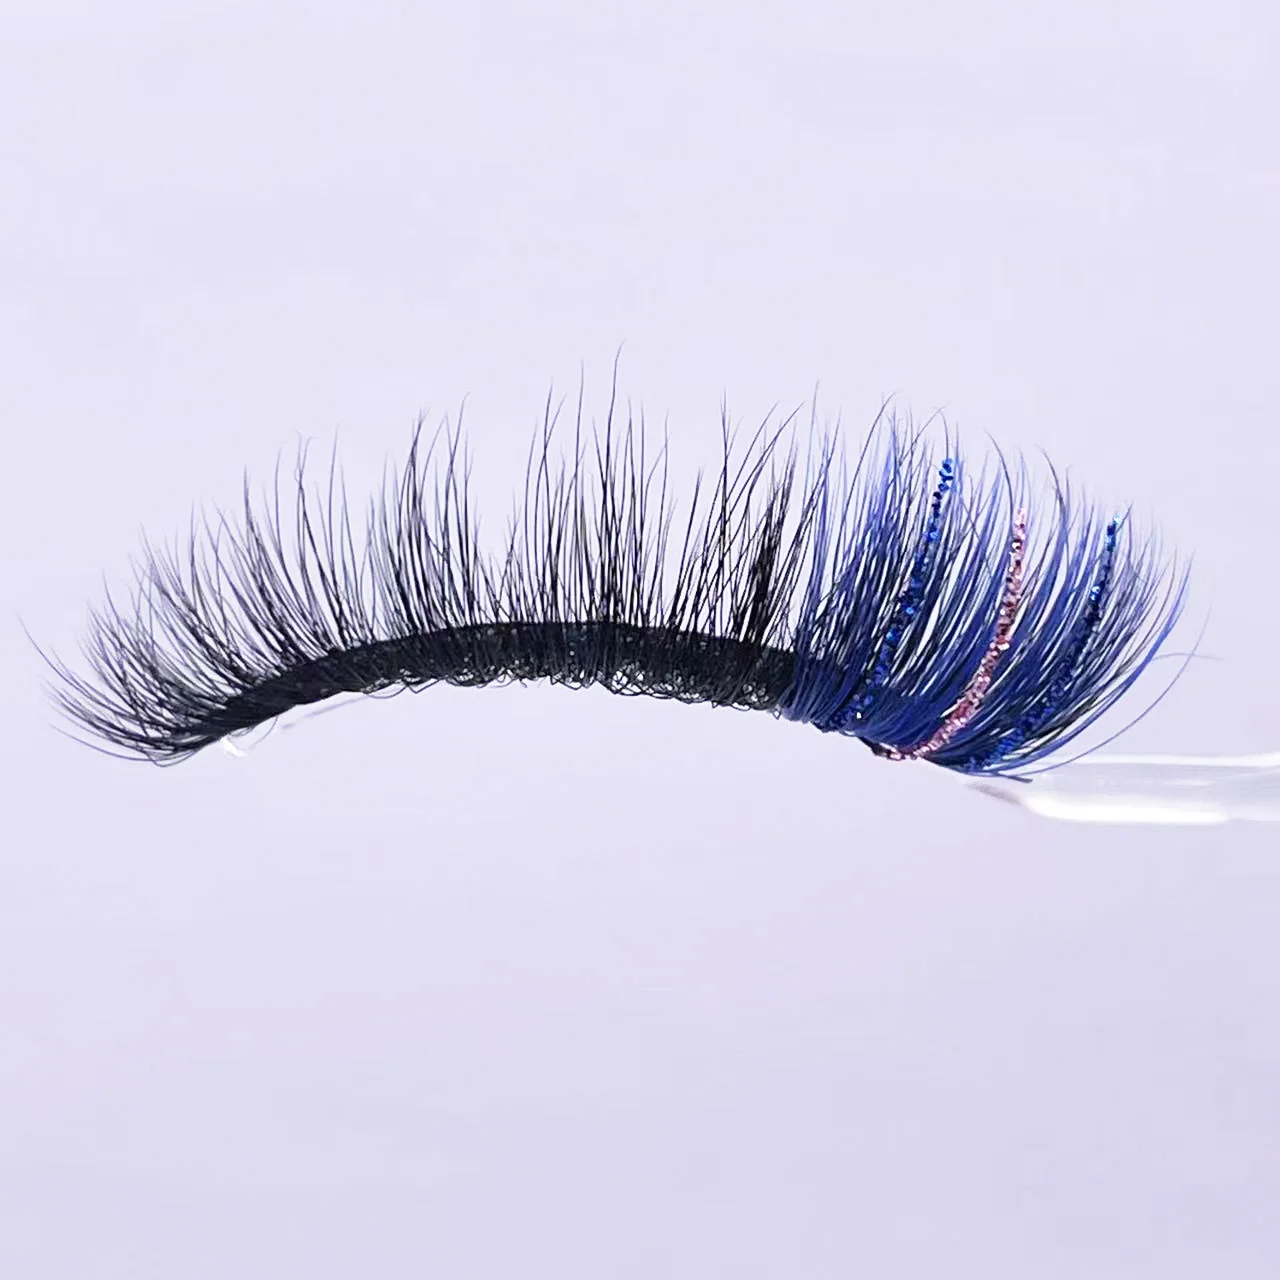 Hbzgtlad Colored Lashes Glitter Mink 15mm -20mm Fluffy Color Streaks Cosplay Makeup Beauty Eyelashes -Outlet Maid Outfit Store S2618f73bb74b49d4bdf2d15d1fbe694f4.jpg